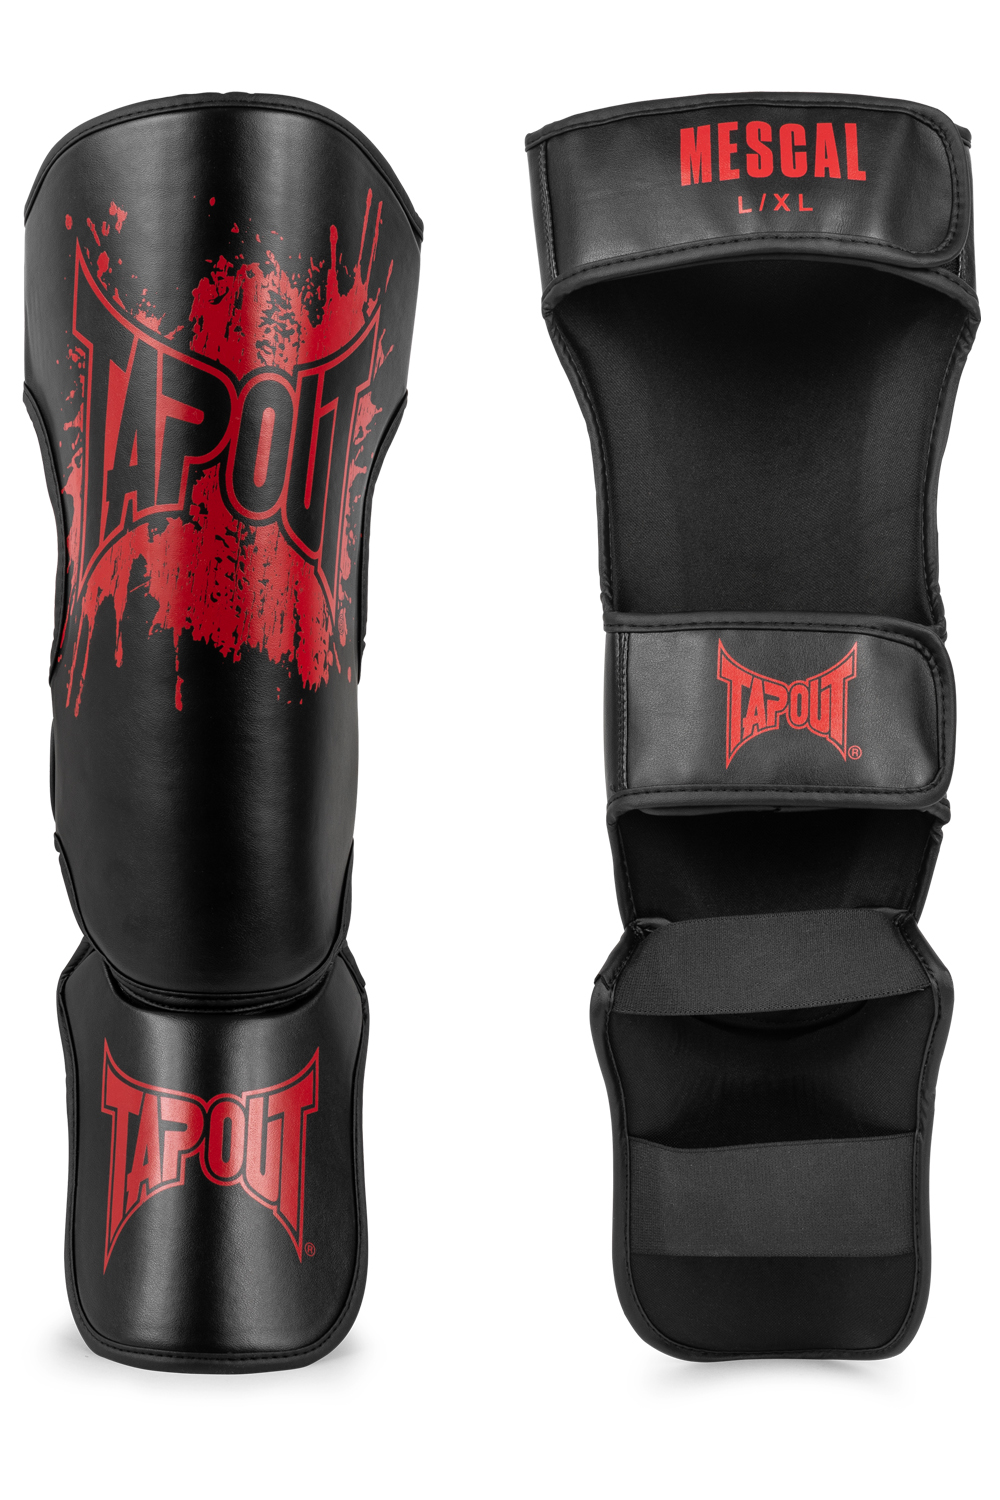 Tapout Artificial leather shin guards (1 pair)